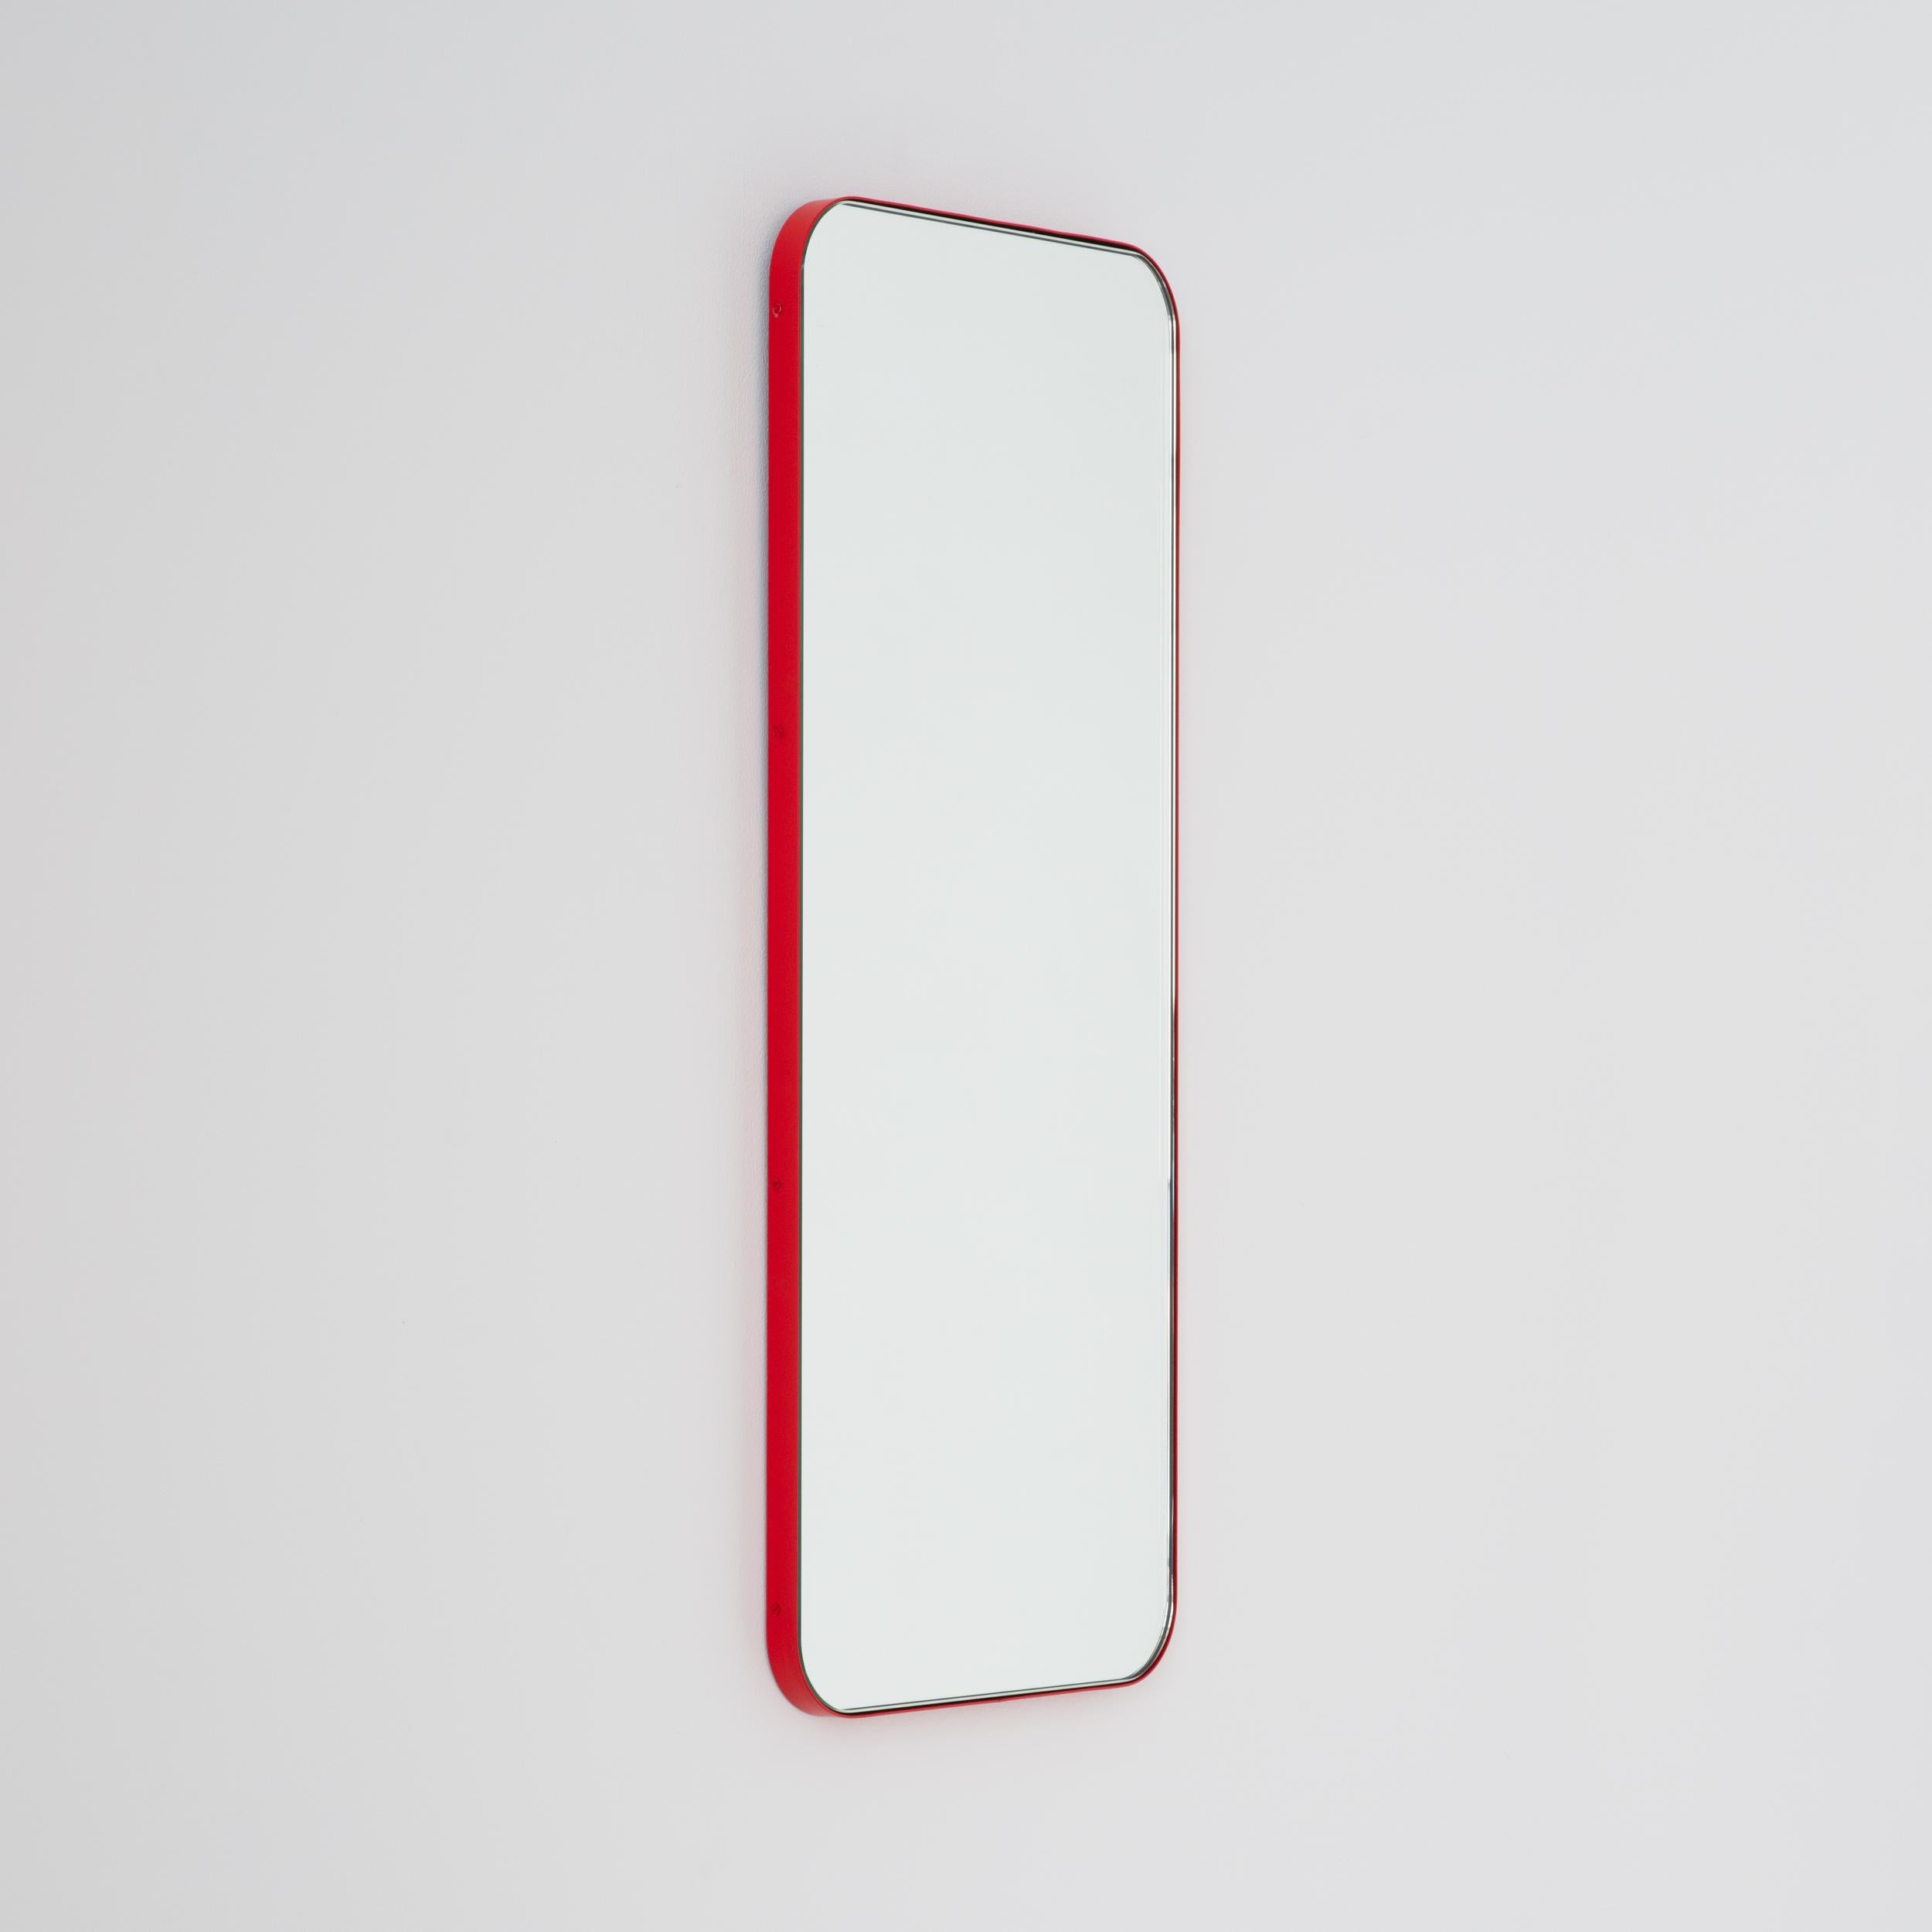 Minimalist rectangular mirror with a modern red frame. Part of the charming Quadris collection, designed and handcrafted in London, UK. 

Our mirrors are designed with an integrated French cleat (split batten) system that ensures the mirror is